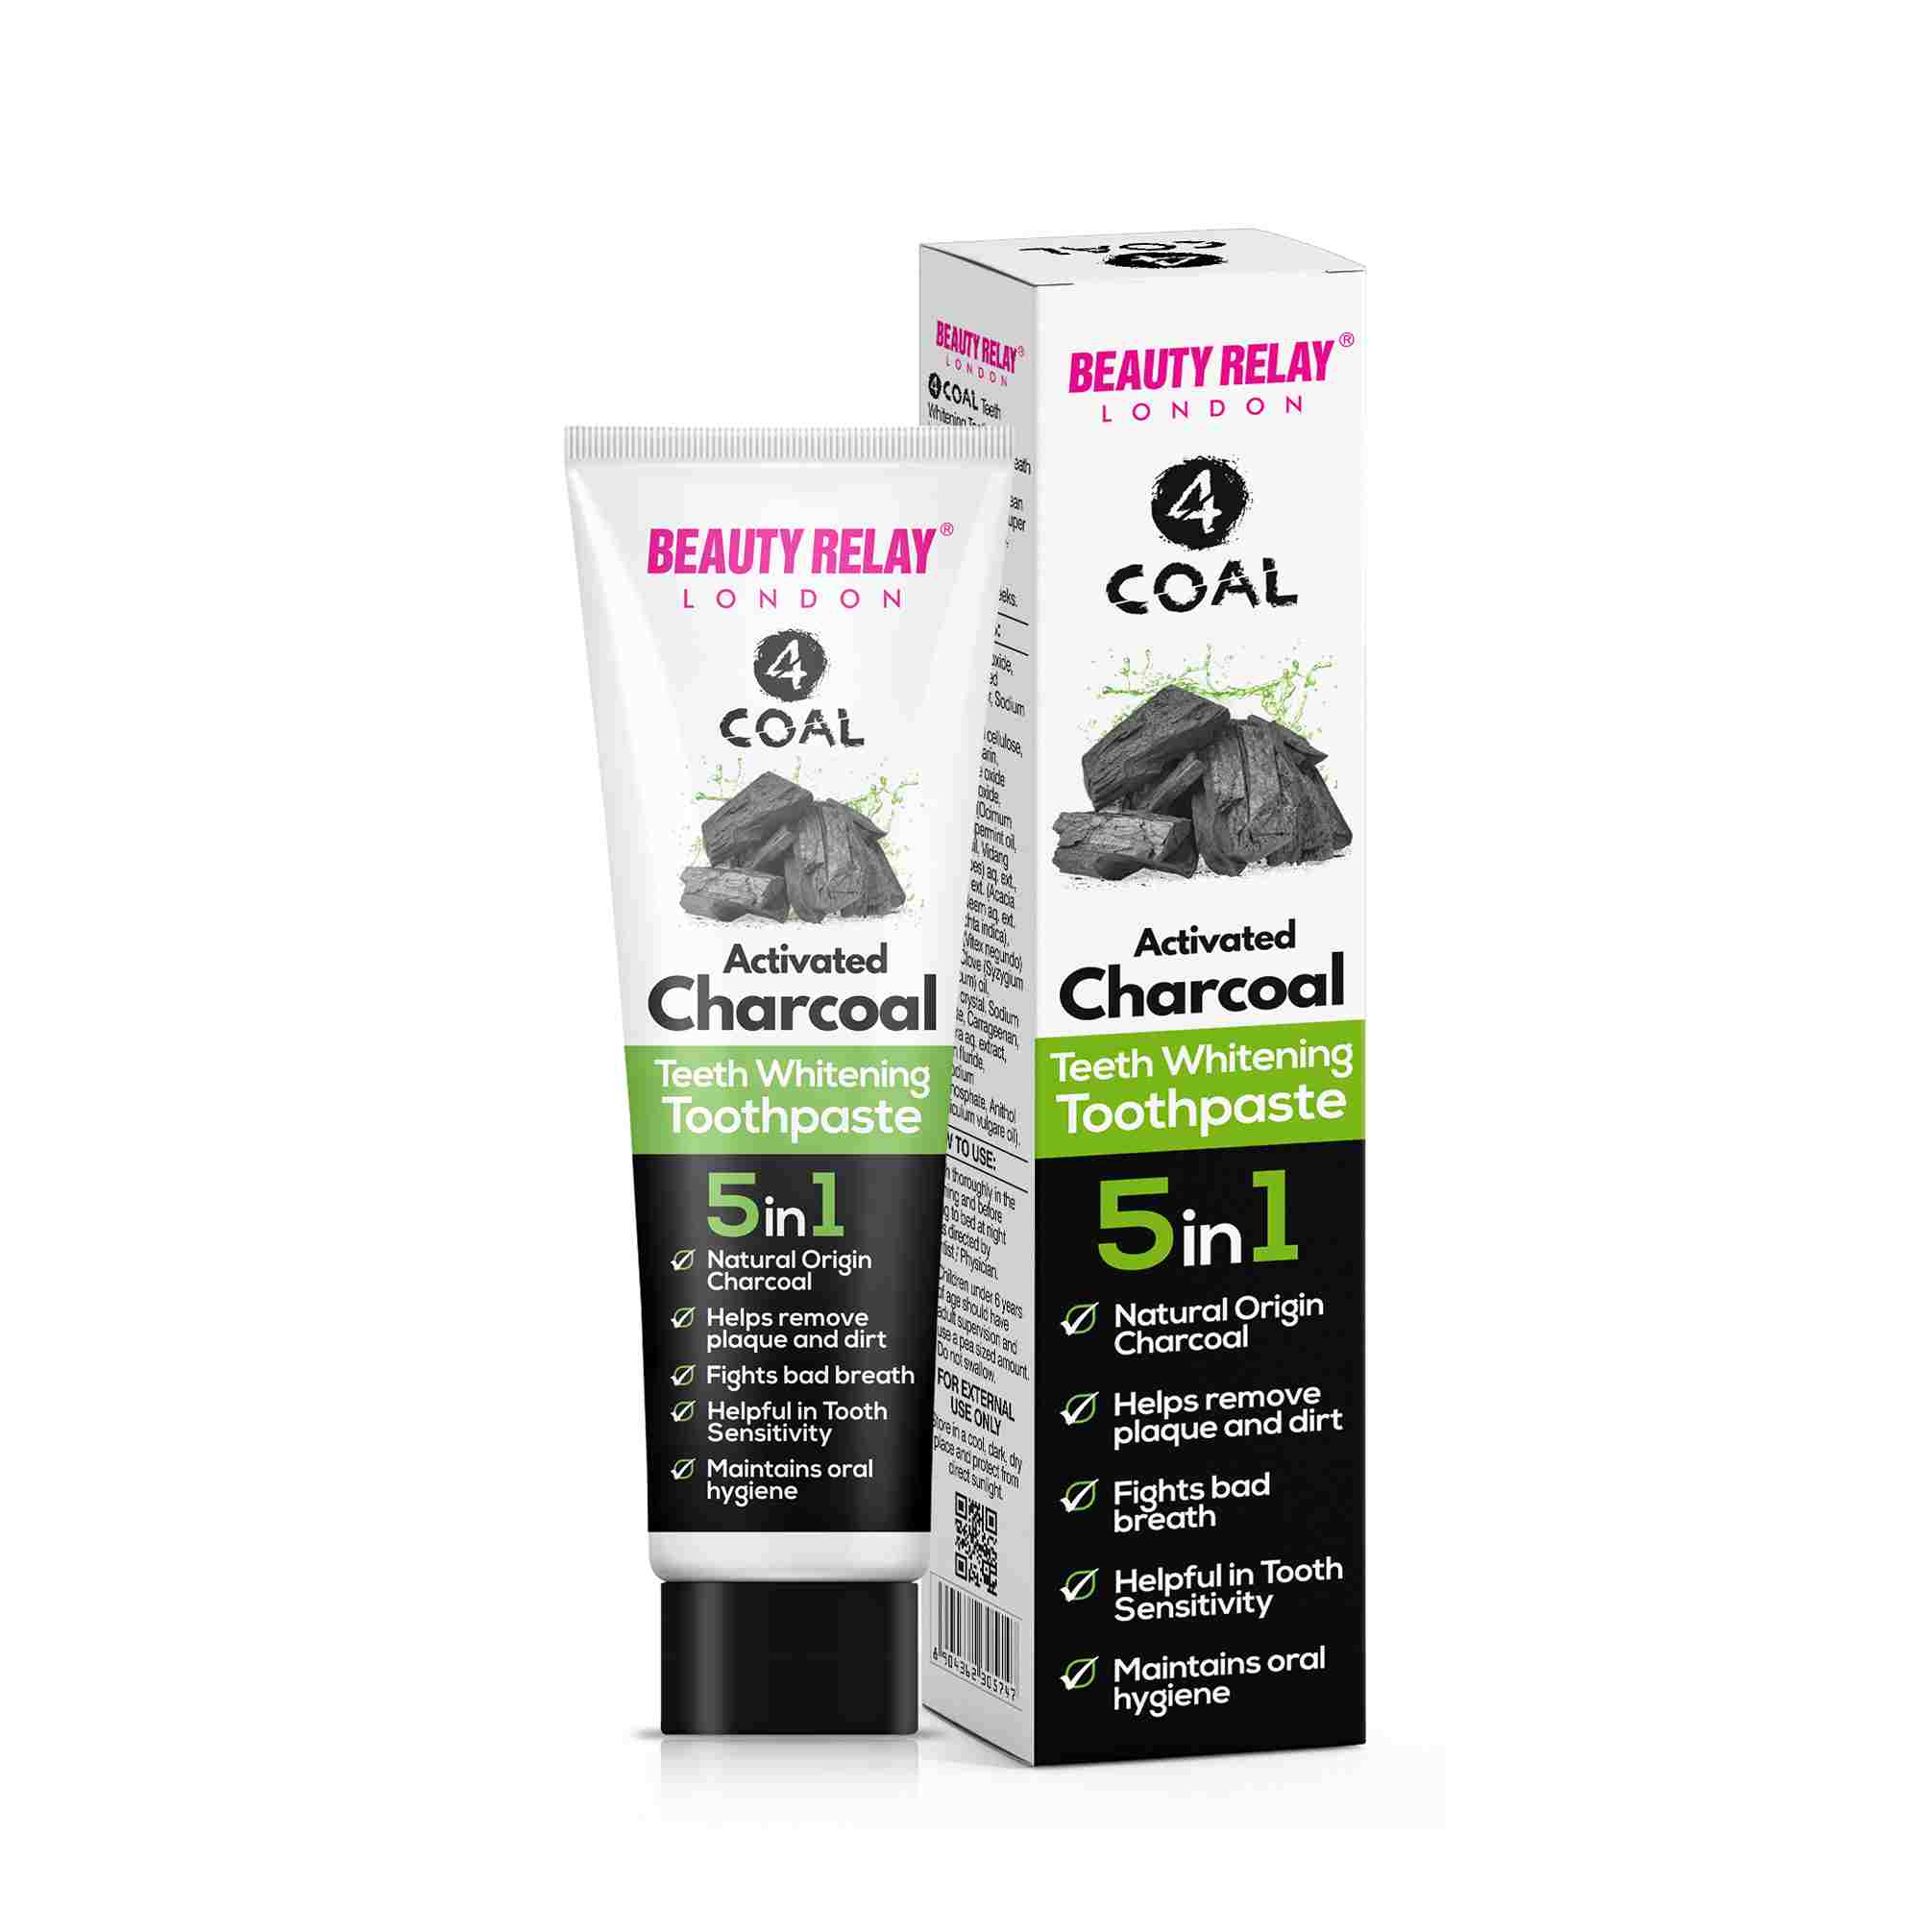 Activated charcoal teeth whitening toothpaste